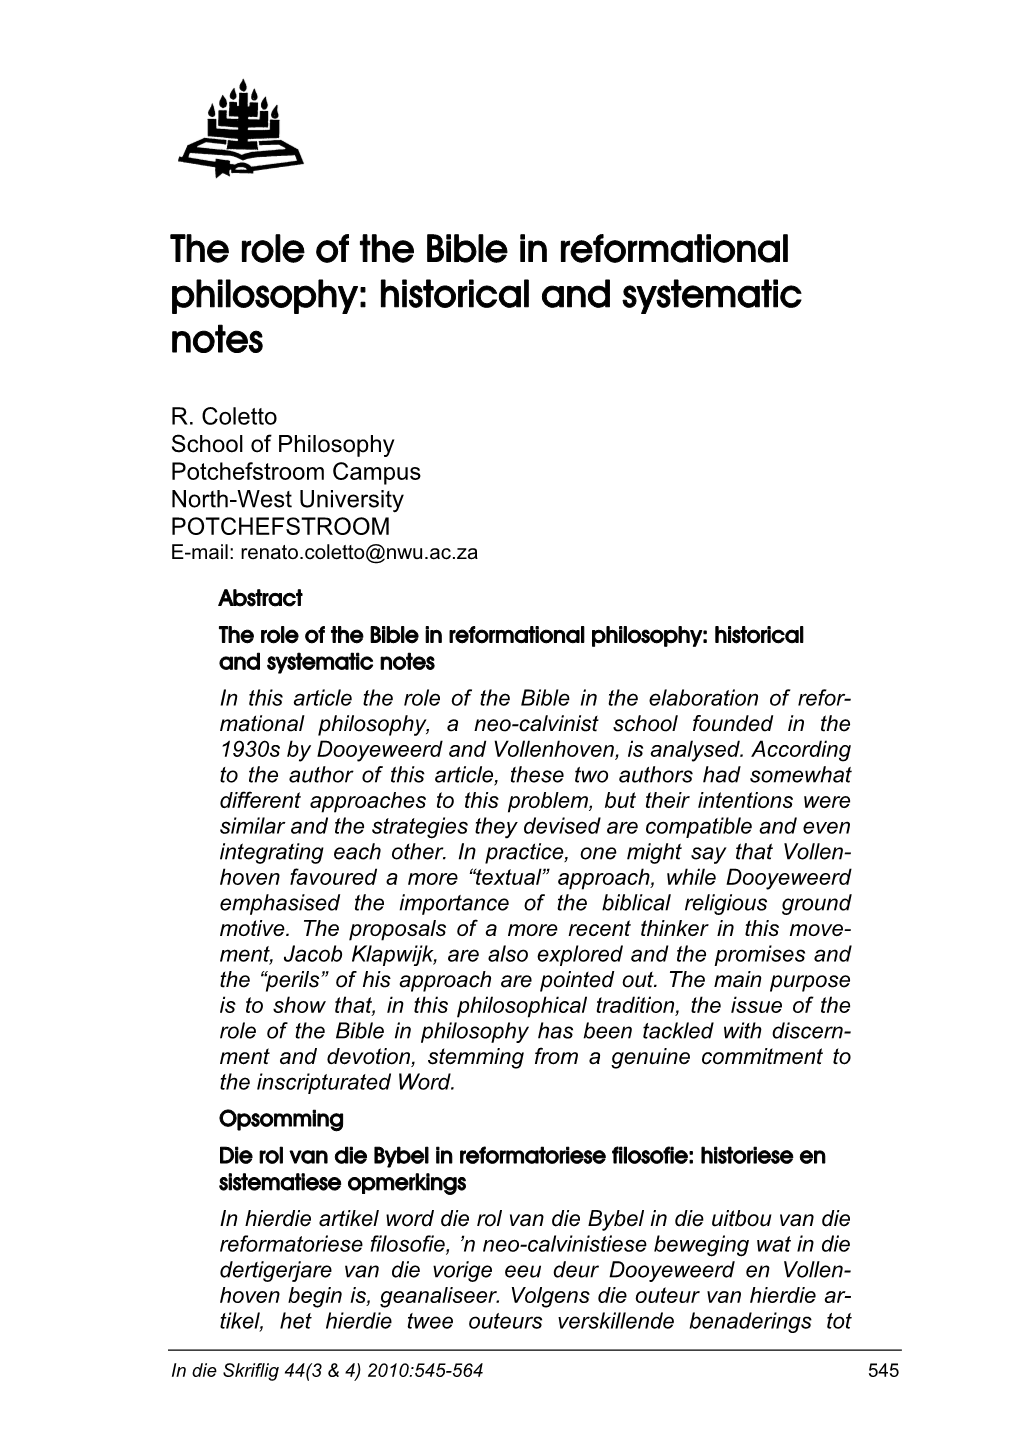 The Role of the Bible in Reformational Philosophy: Historical and Systematic Notes